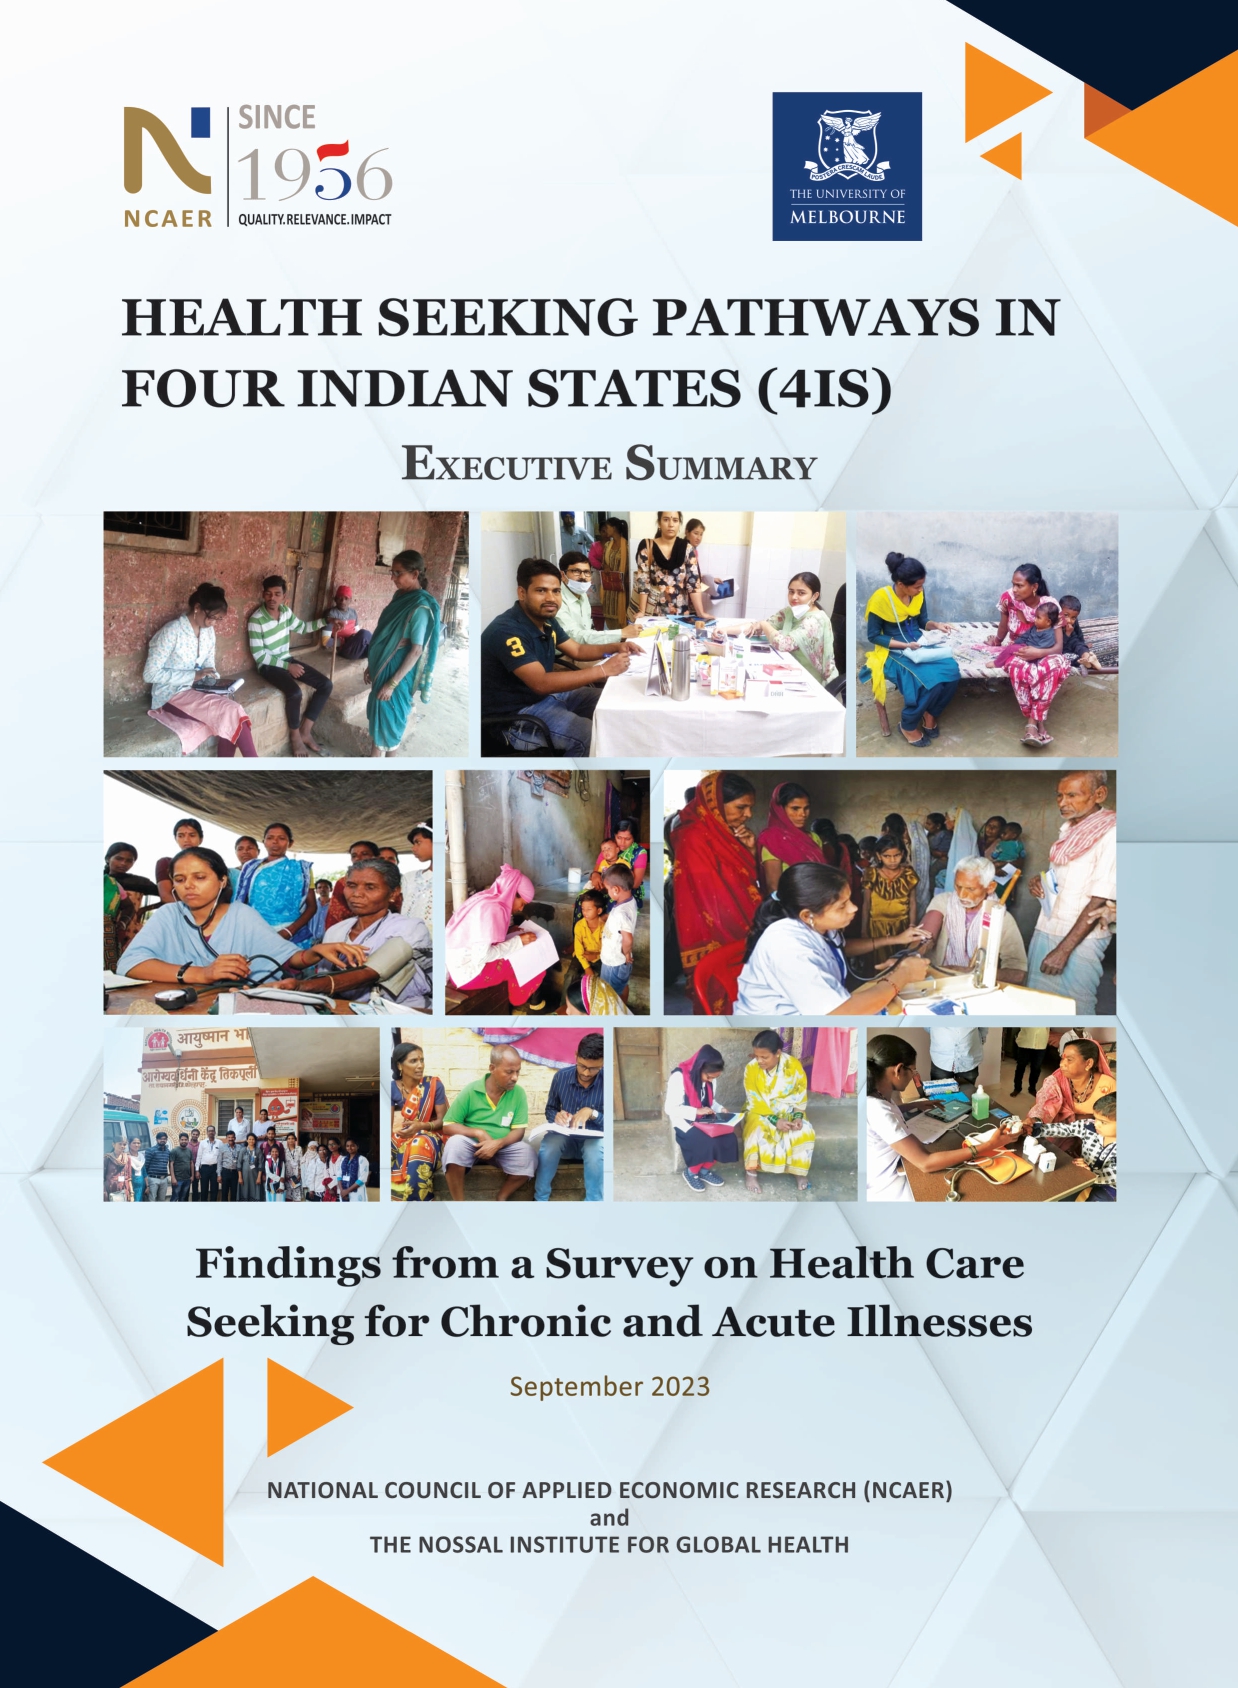 Executive Summary: Health Seeking Pathways in Four Indian States